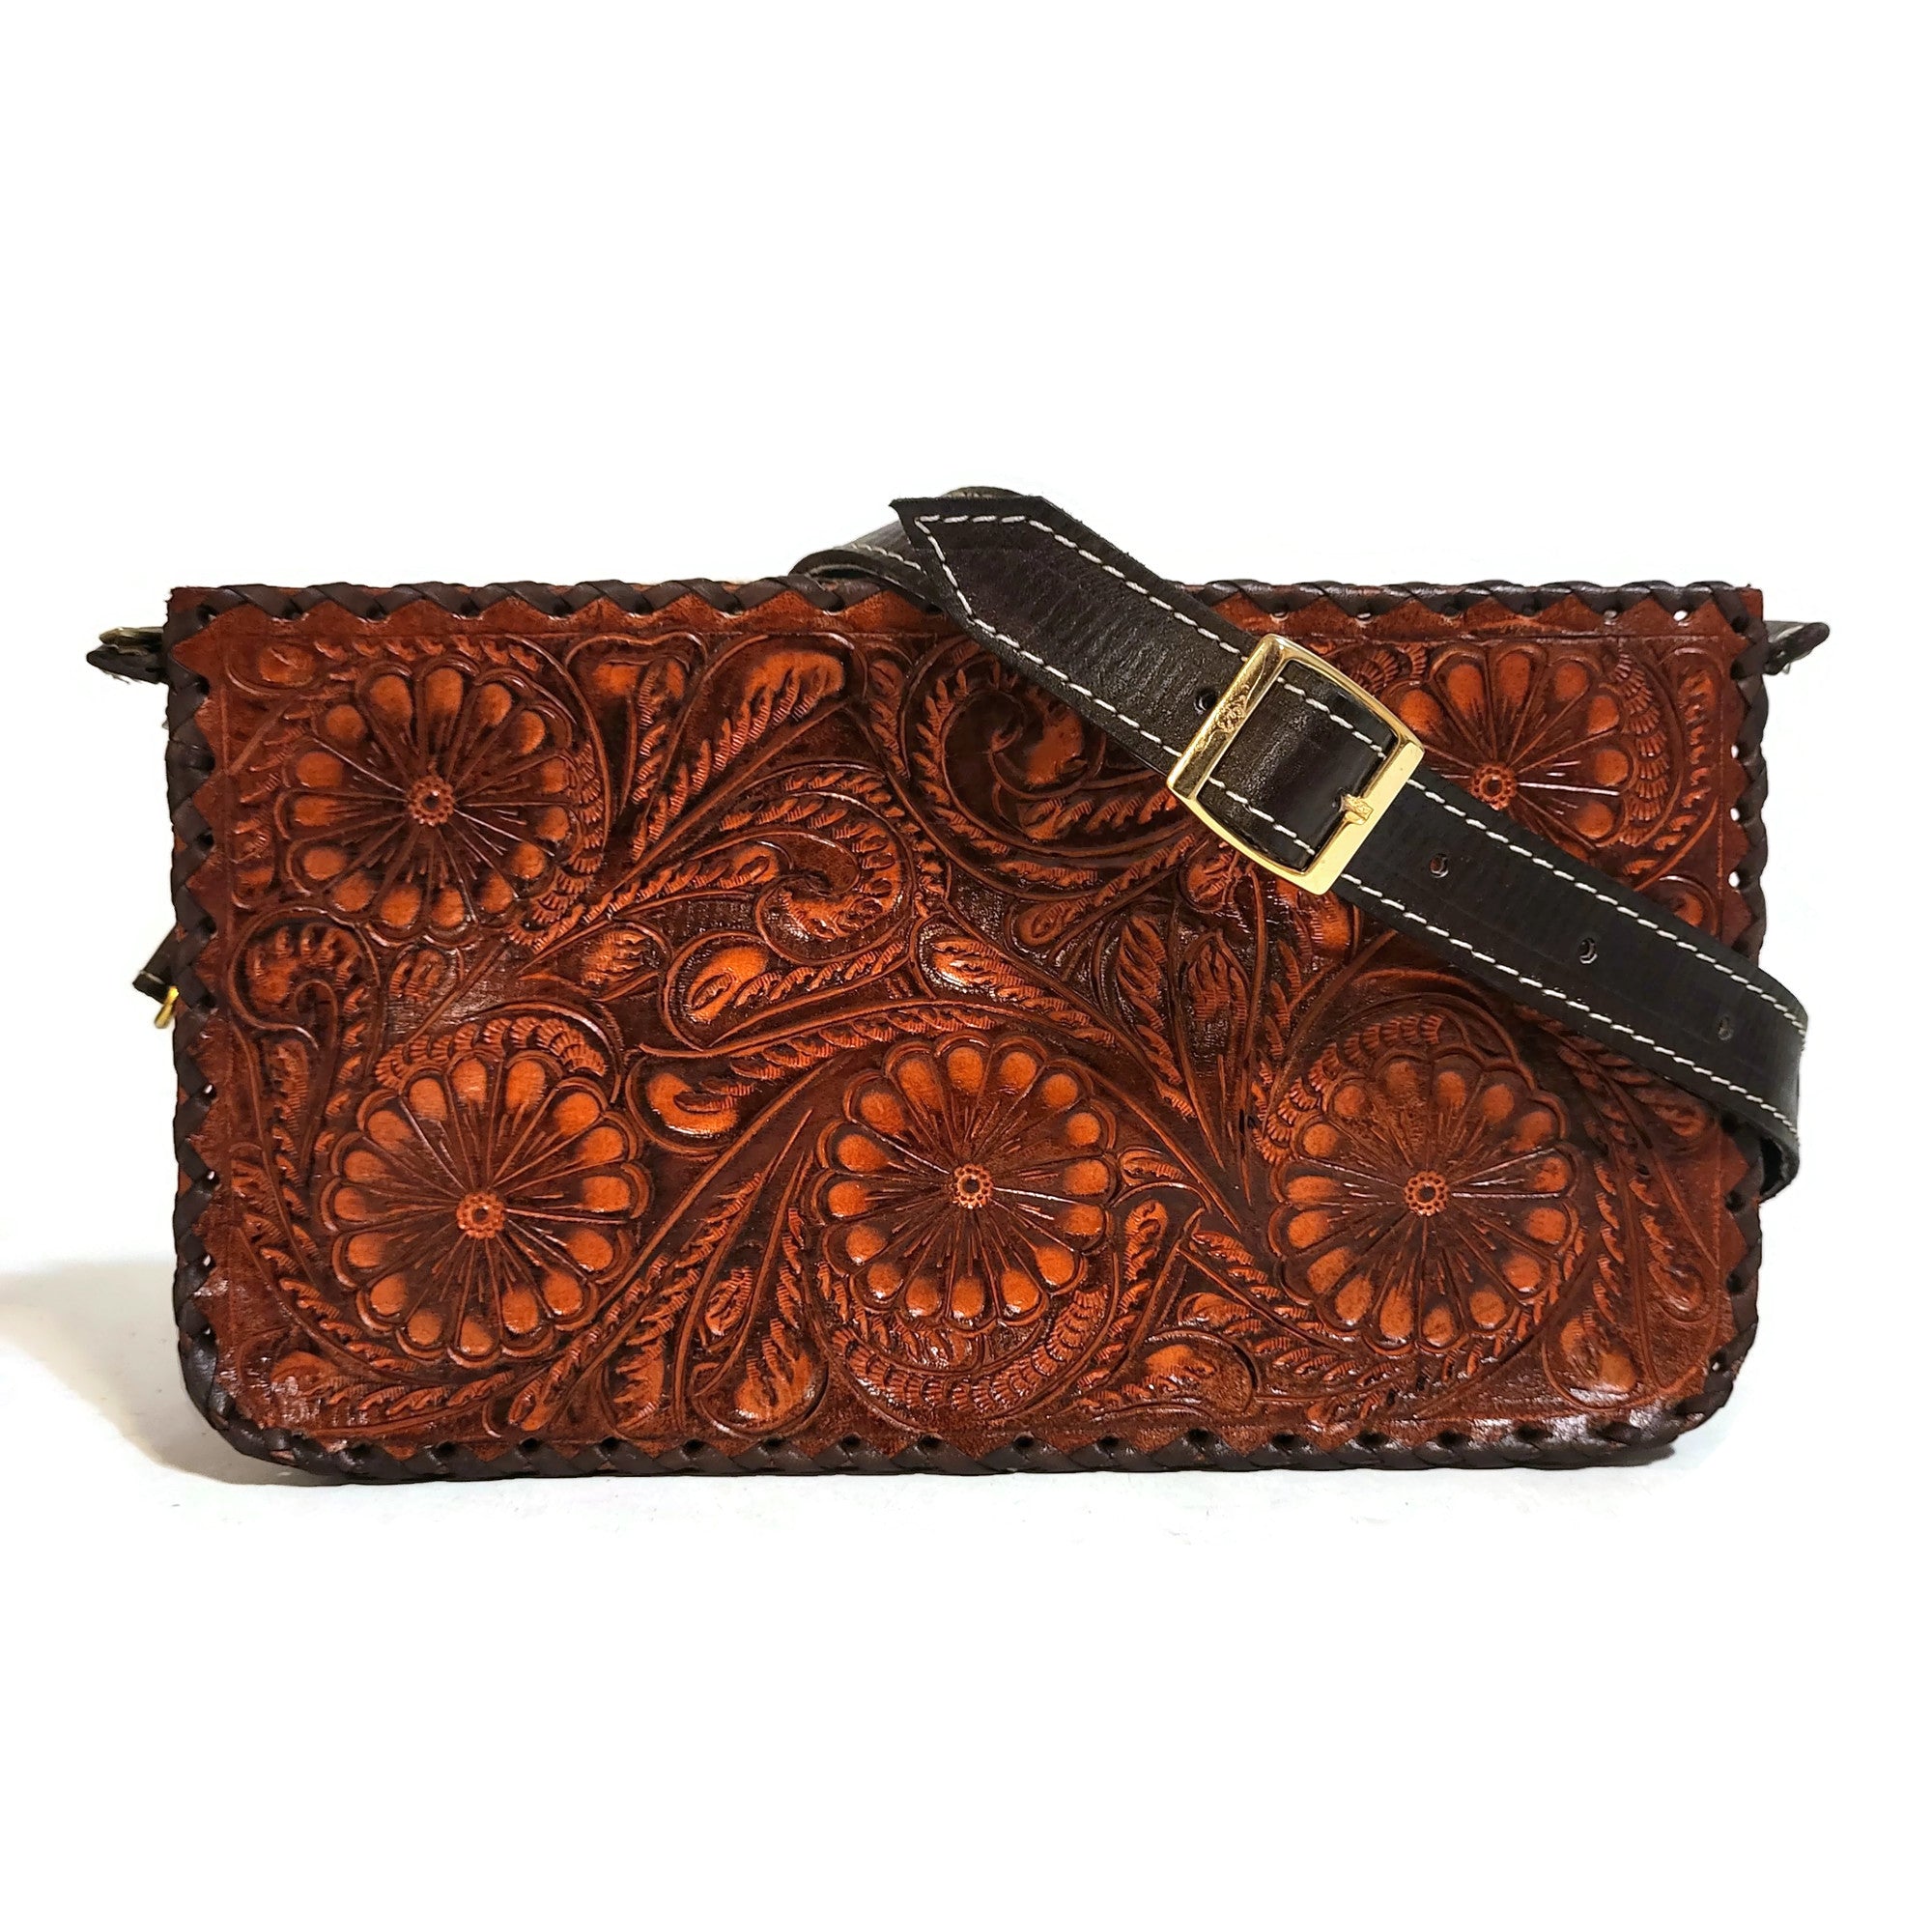 Hand tooled leather bag